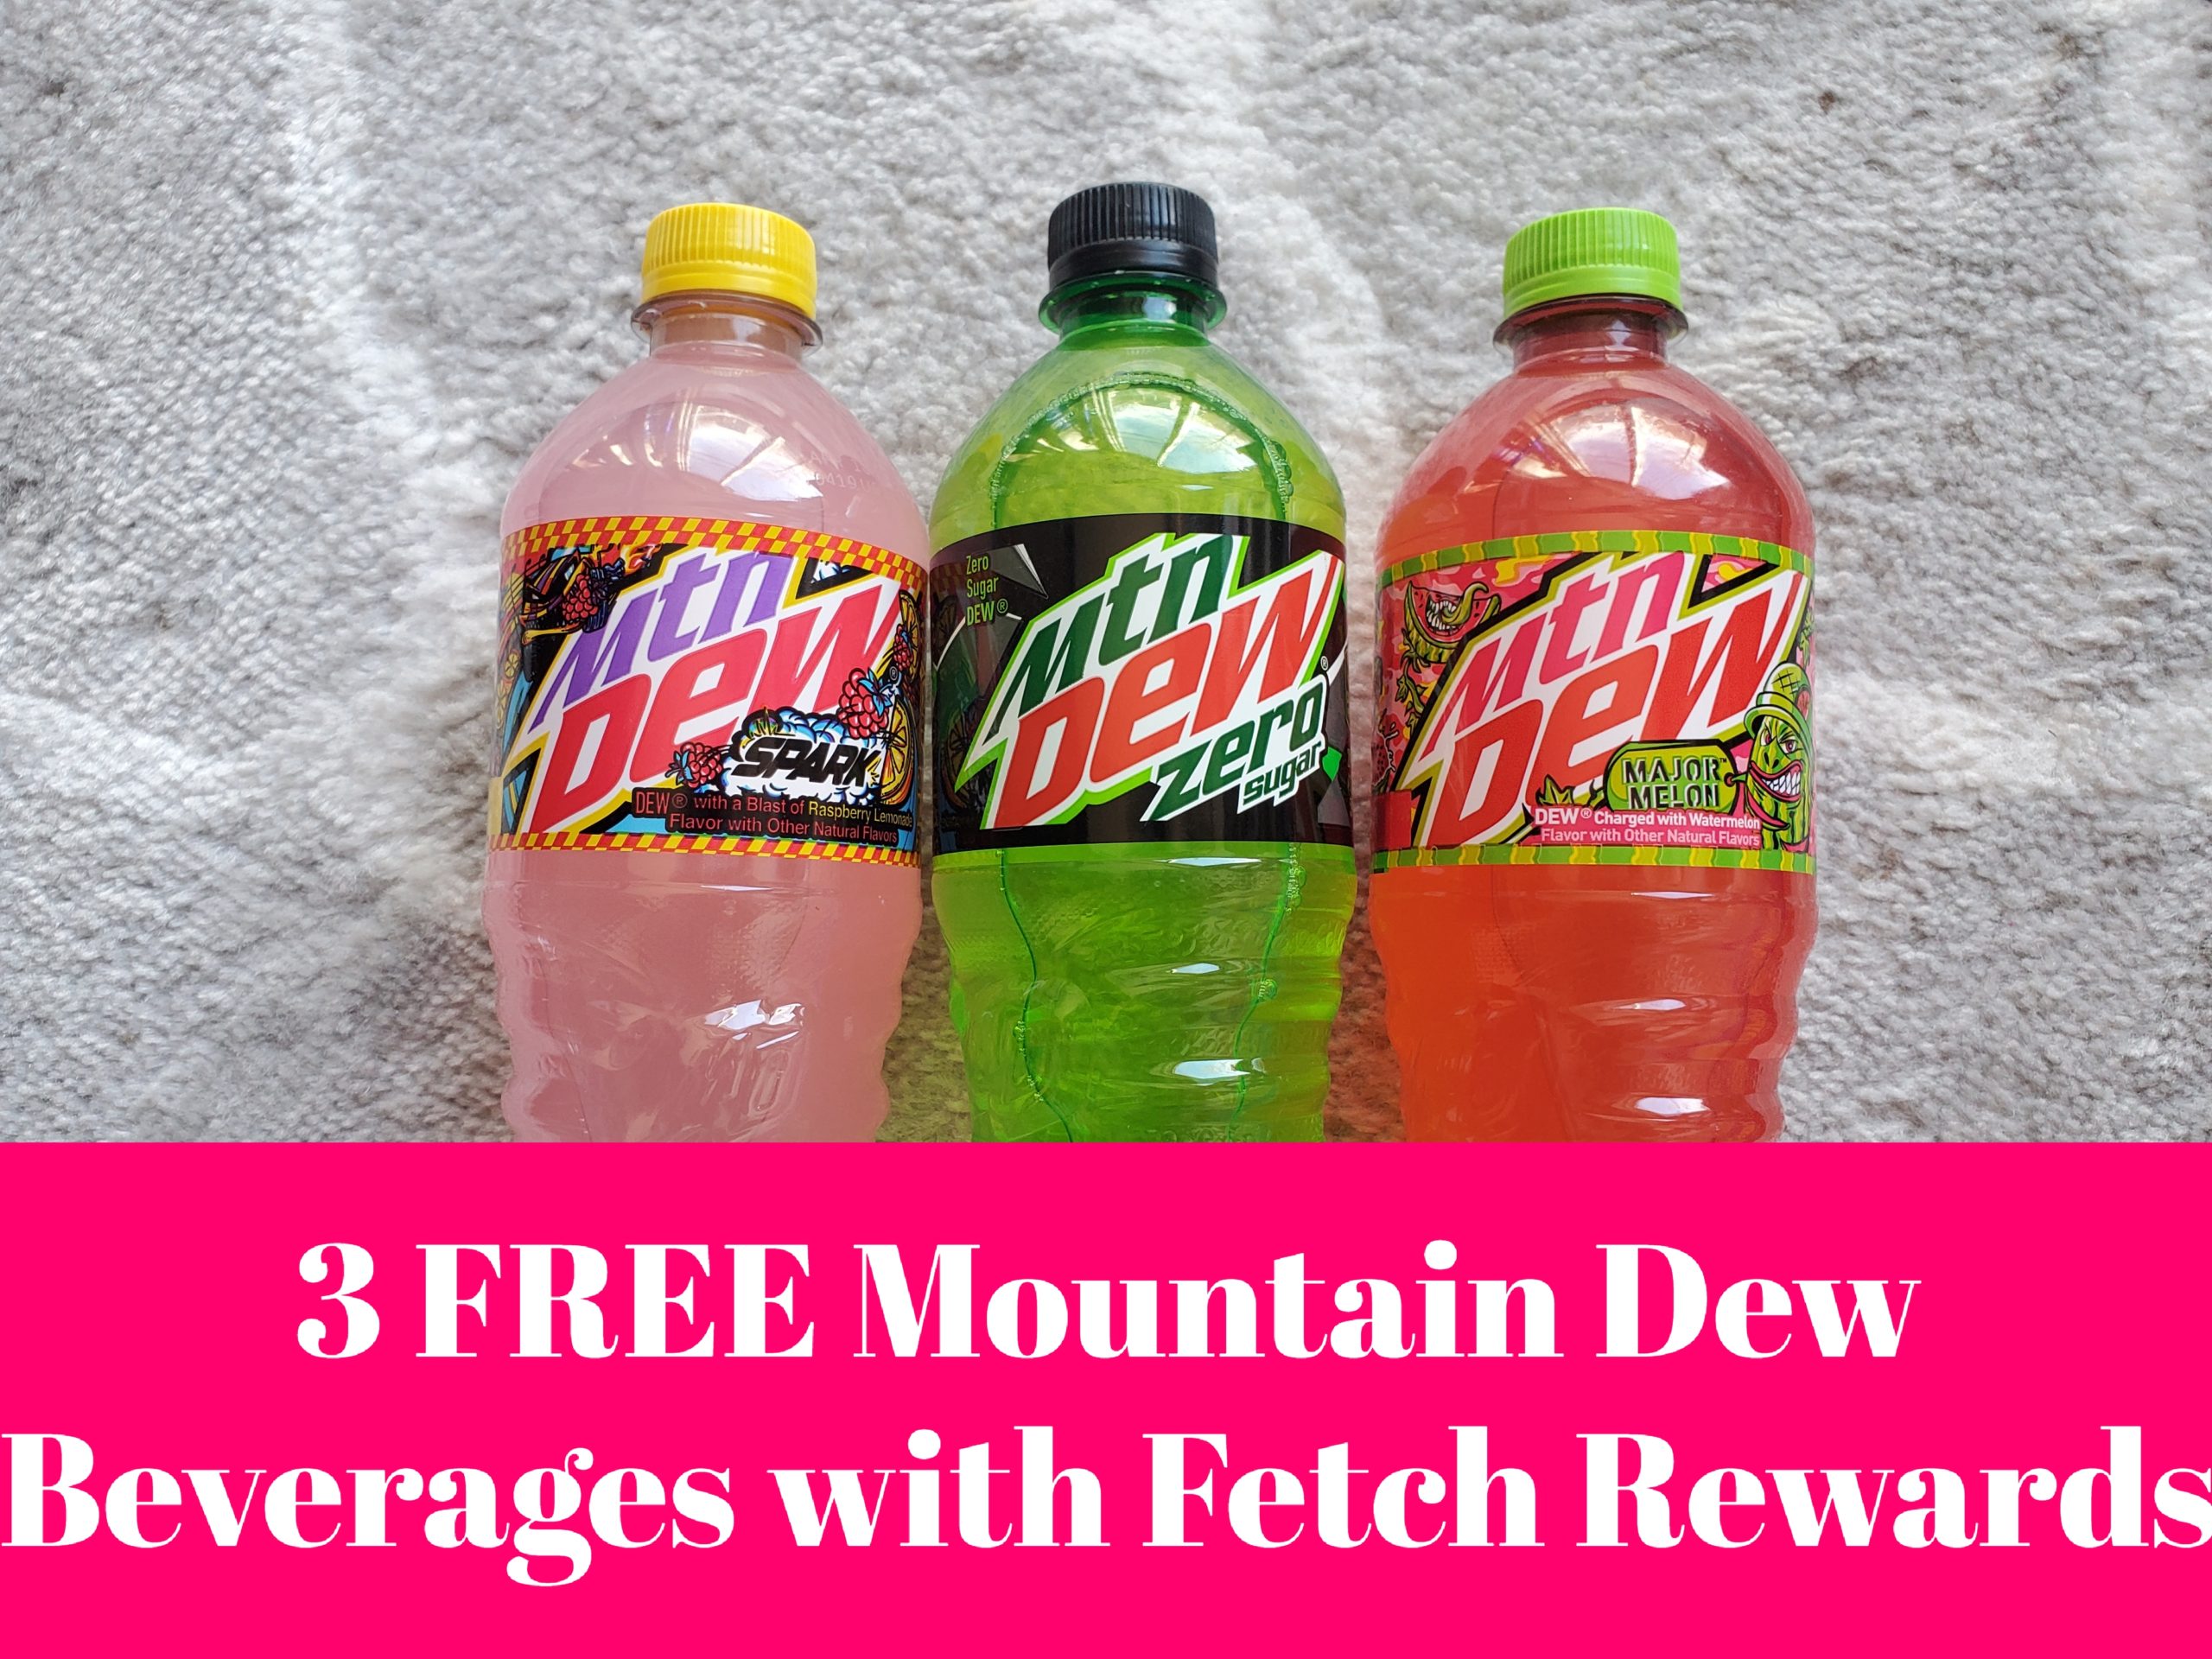 3 Free Mountain Dew Beverages with Fetch Rewards